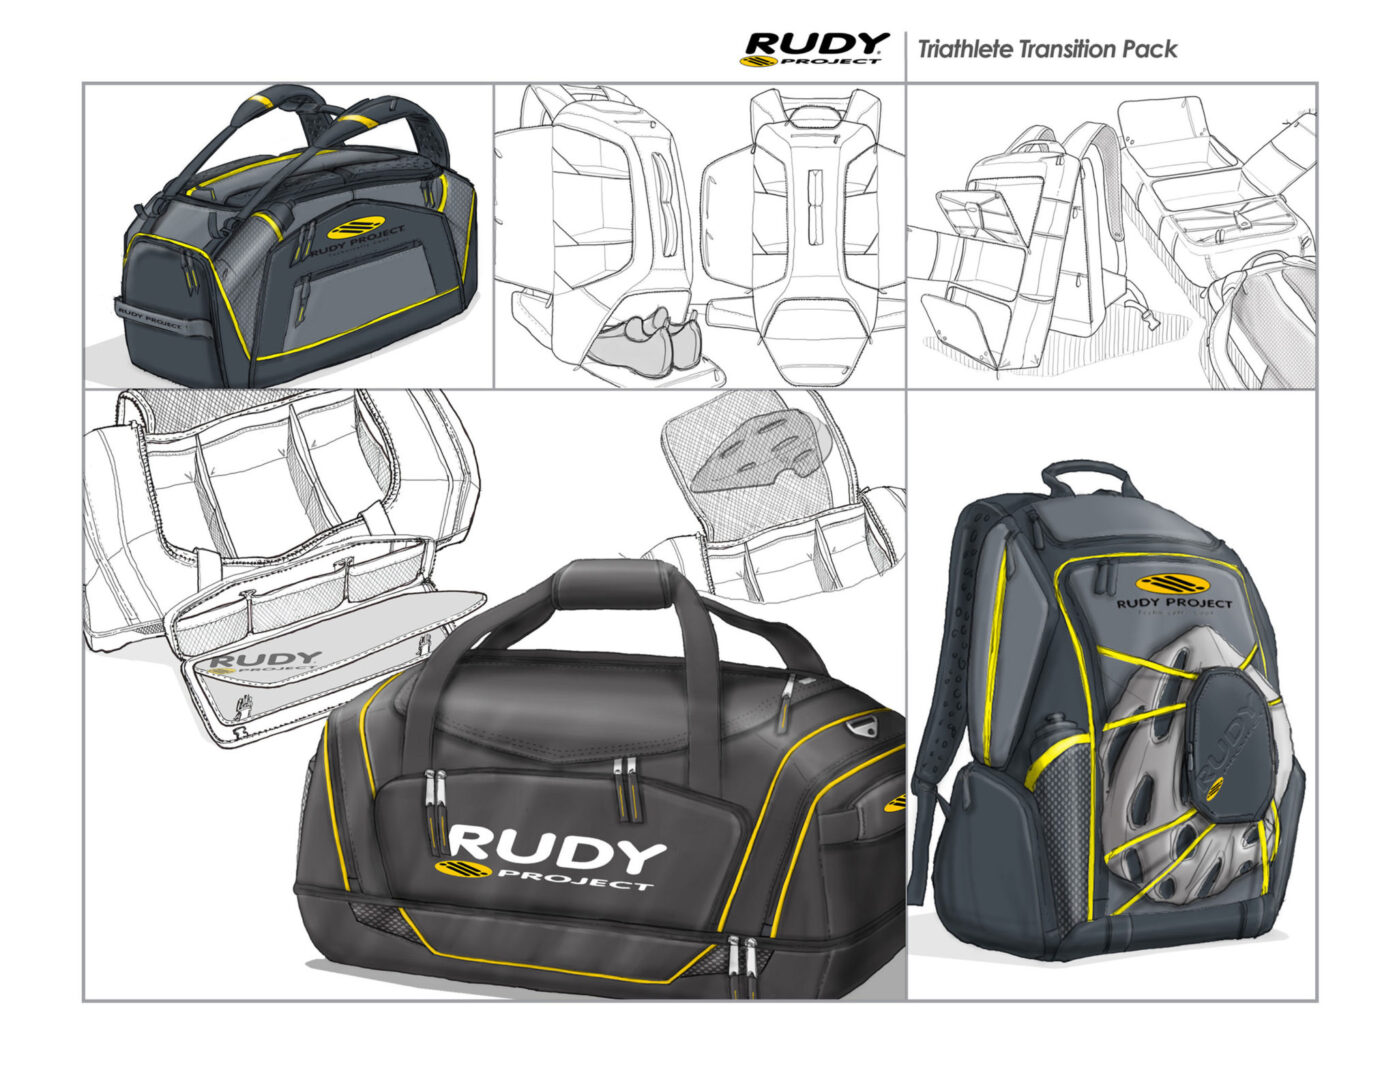 Rudy Project Triathlete Transition Pack